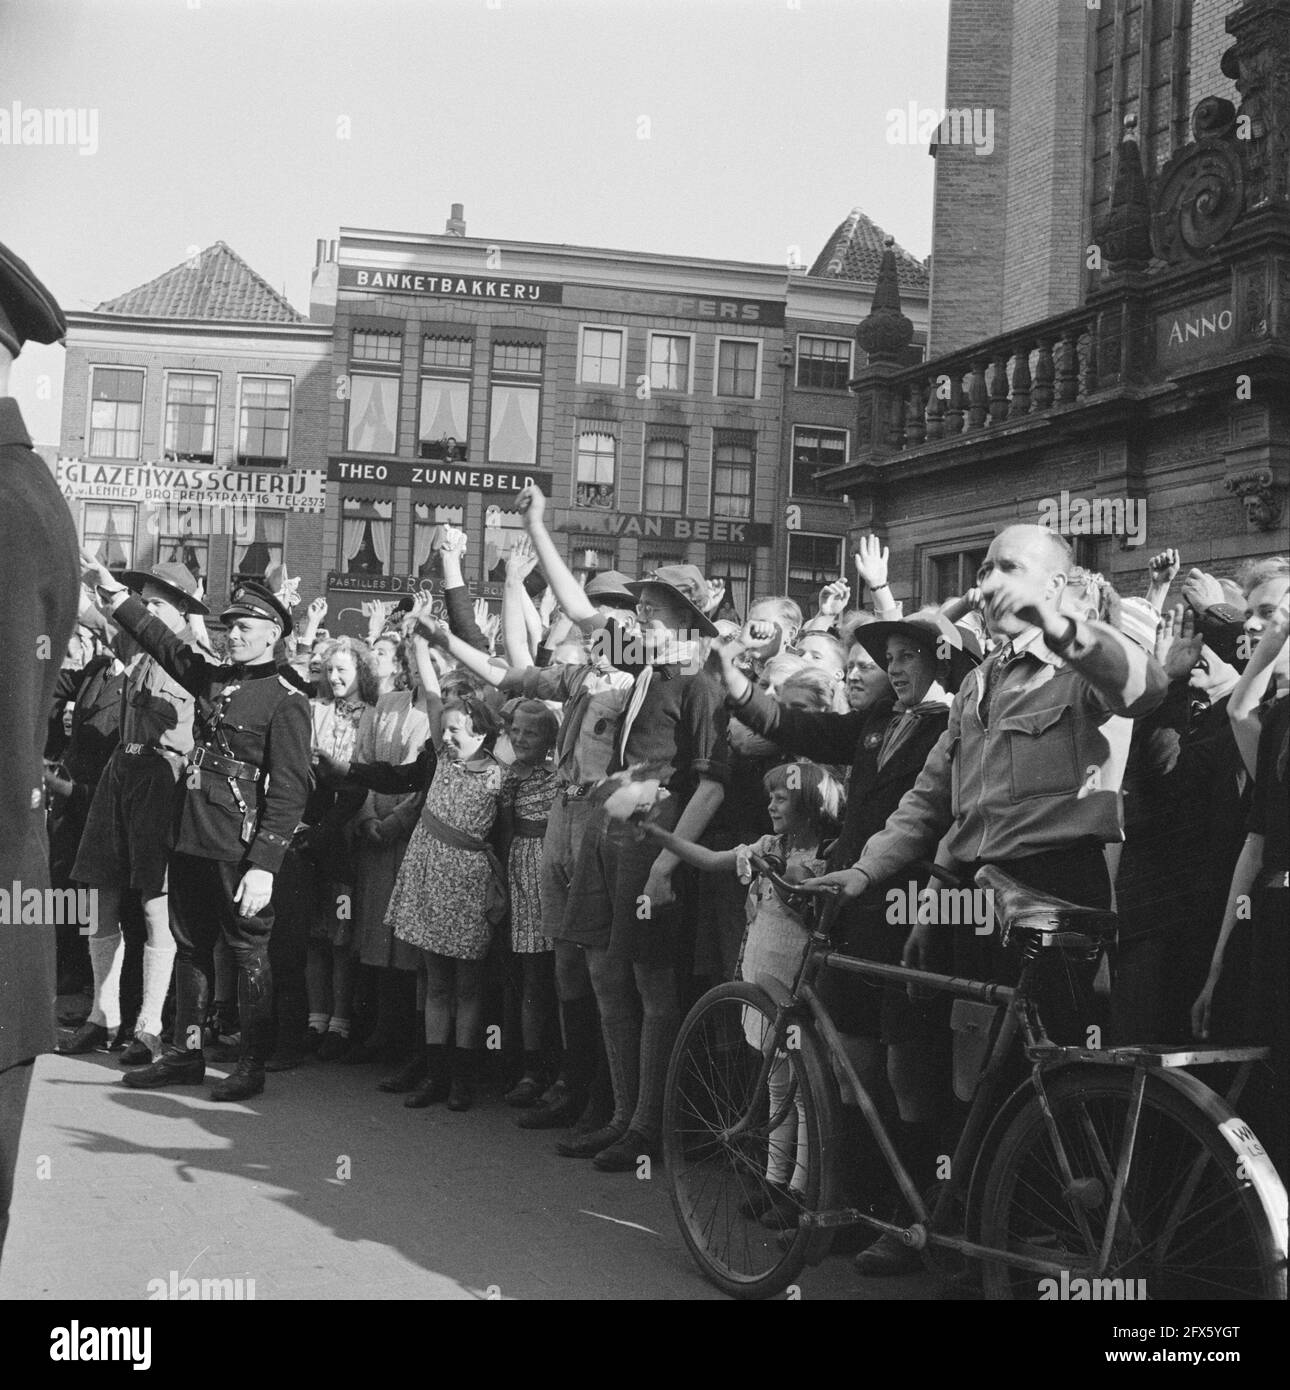 Great enthusiasm of Zwolle citizenry, April 17, 1945, The Netherlands, 20th century press agency photo, news to remember, documentary, historic photography 1945-1990, visual stories, human history of the Twentieth Century, capturing moments in time Stock Photo